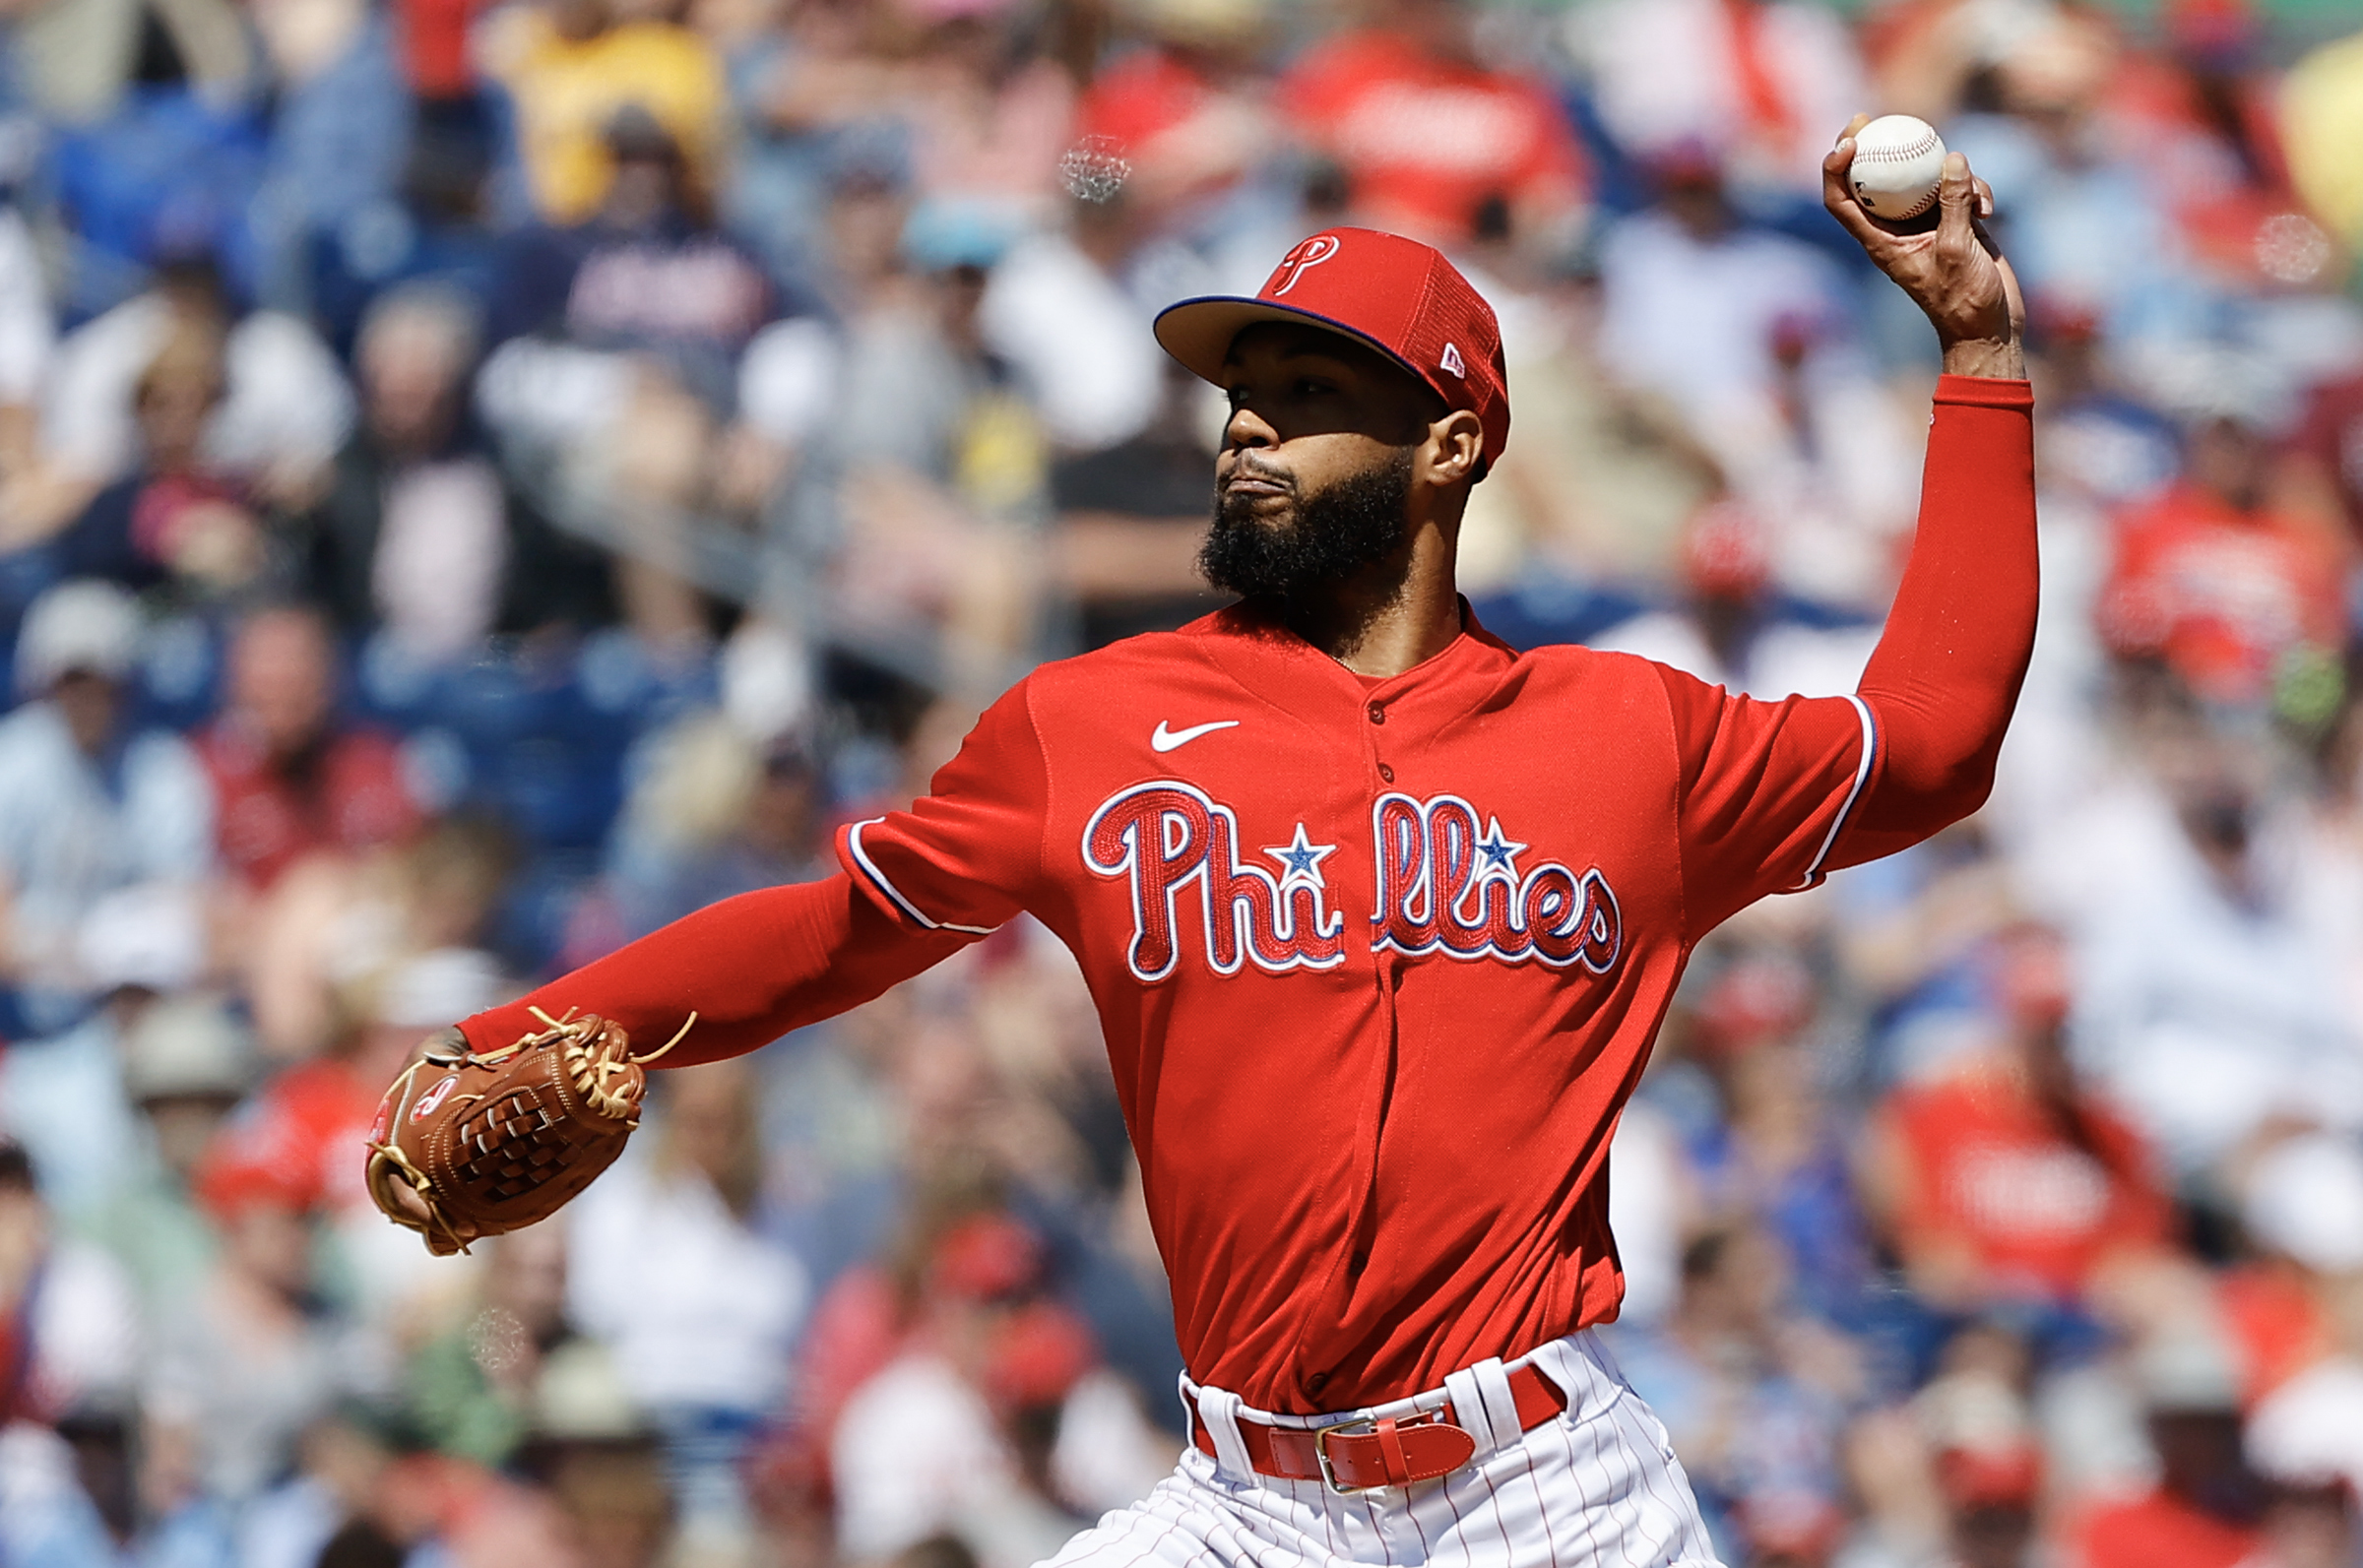 Photos from the Phillies spring training game loss to the Braves